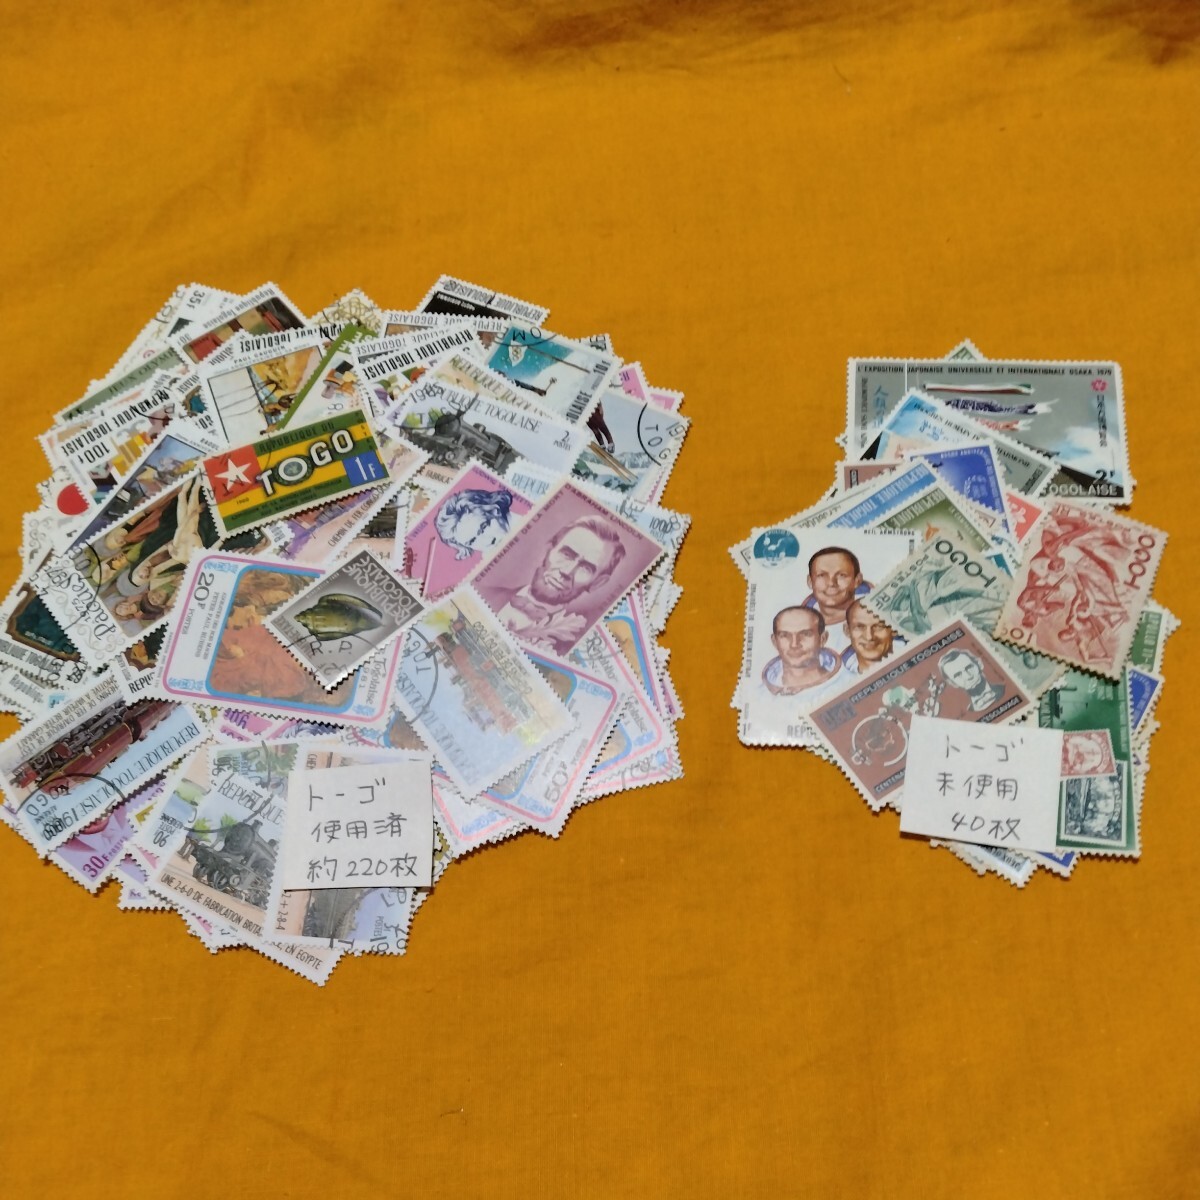 T-247 [. summarize ] foreign stamp (to-go) used approximately 220 sheets, unused 40 sheets 